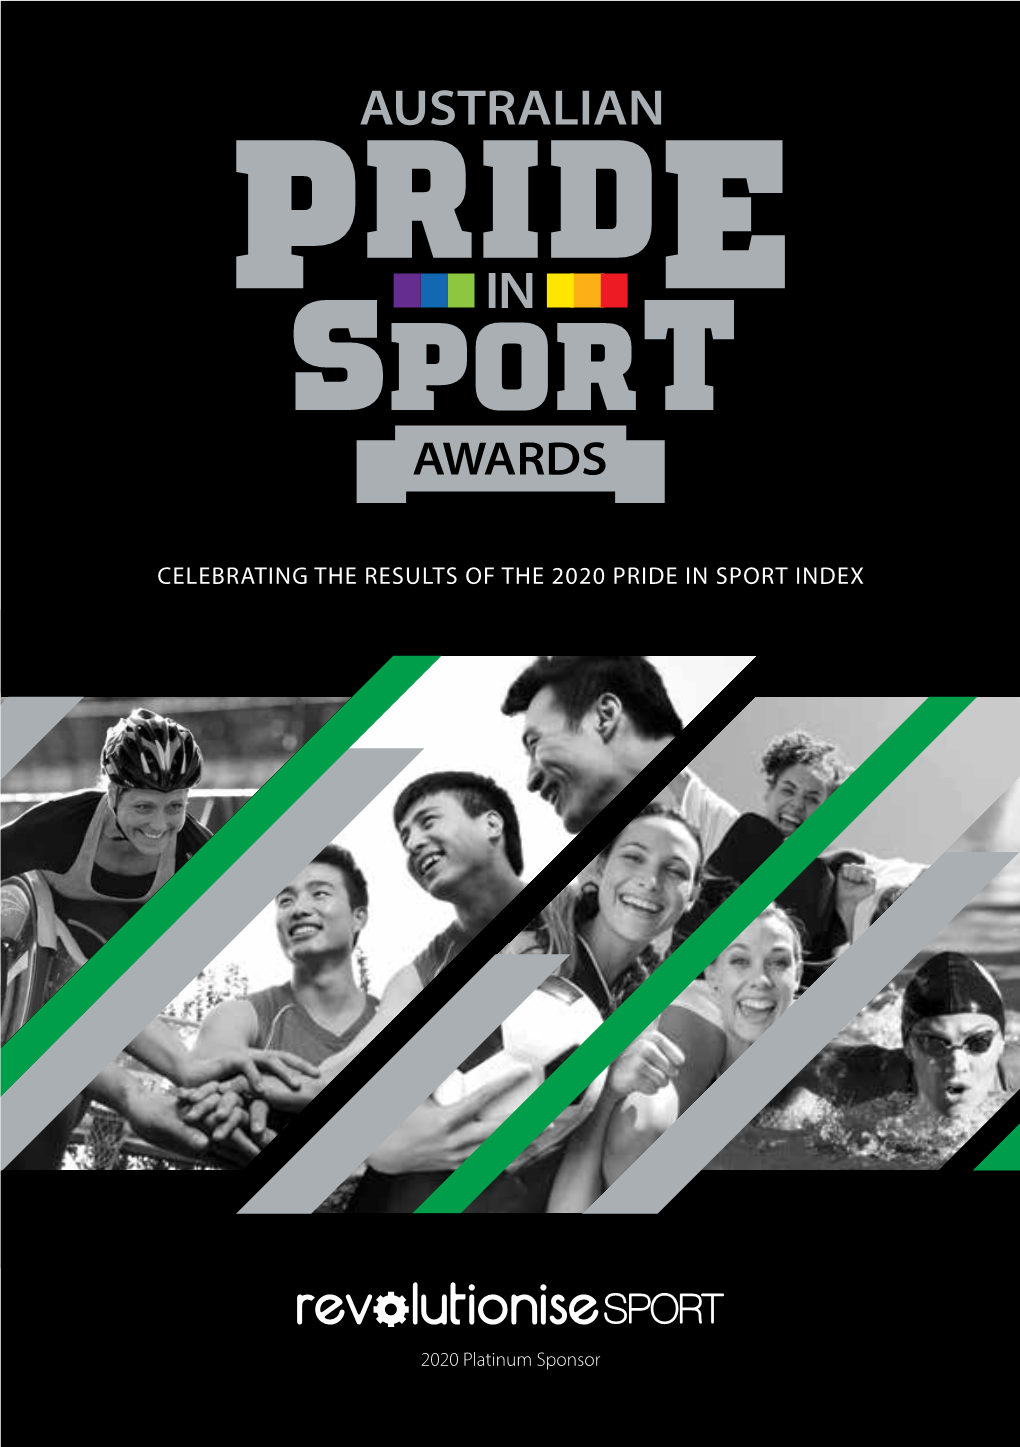 Celebrating the Results of the 2020 Pride in Sport Index